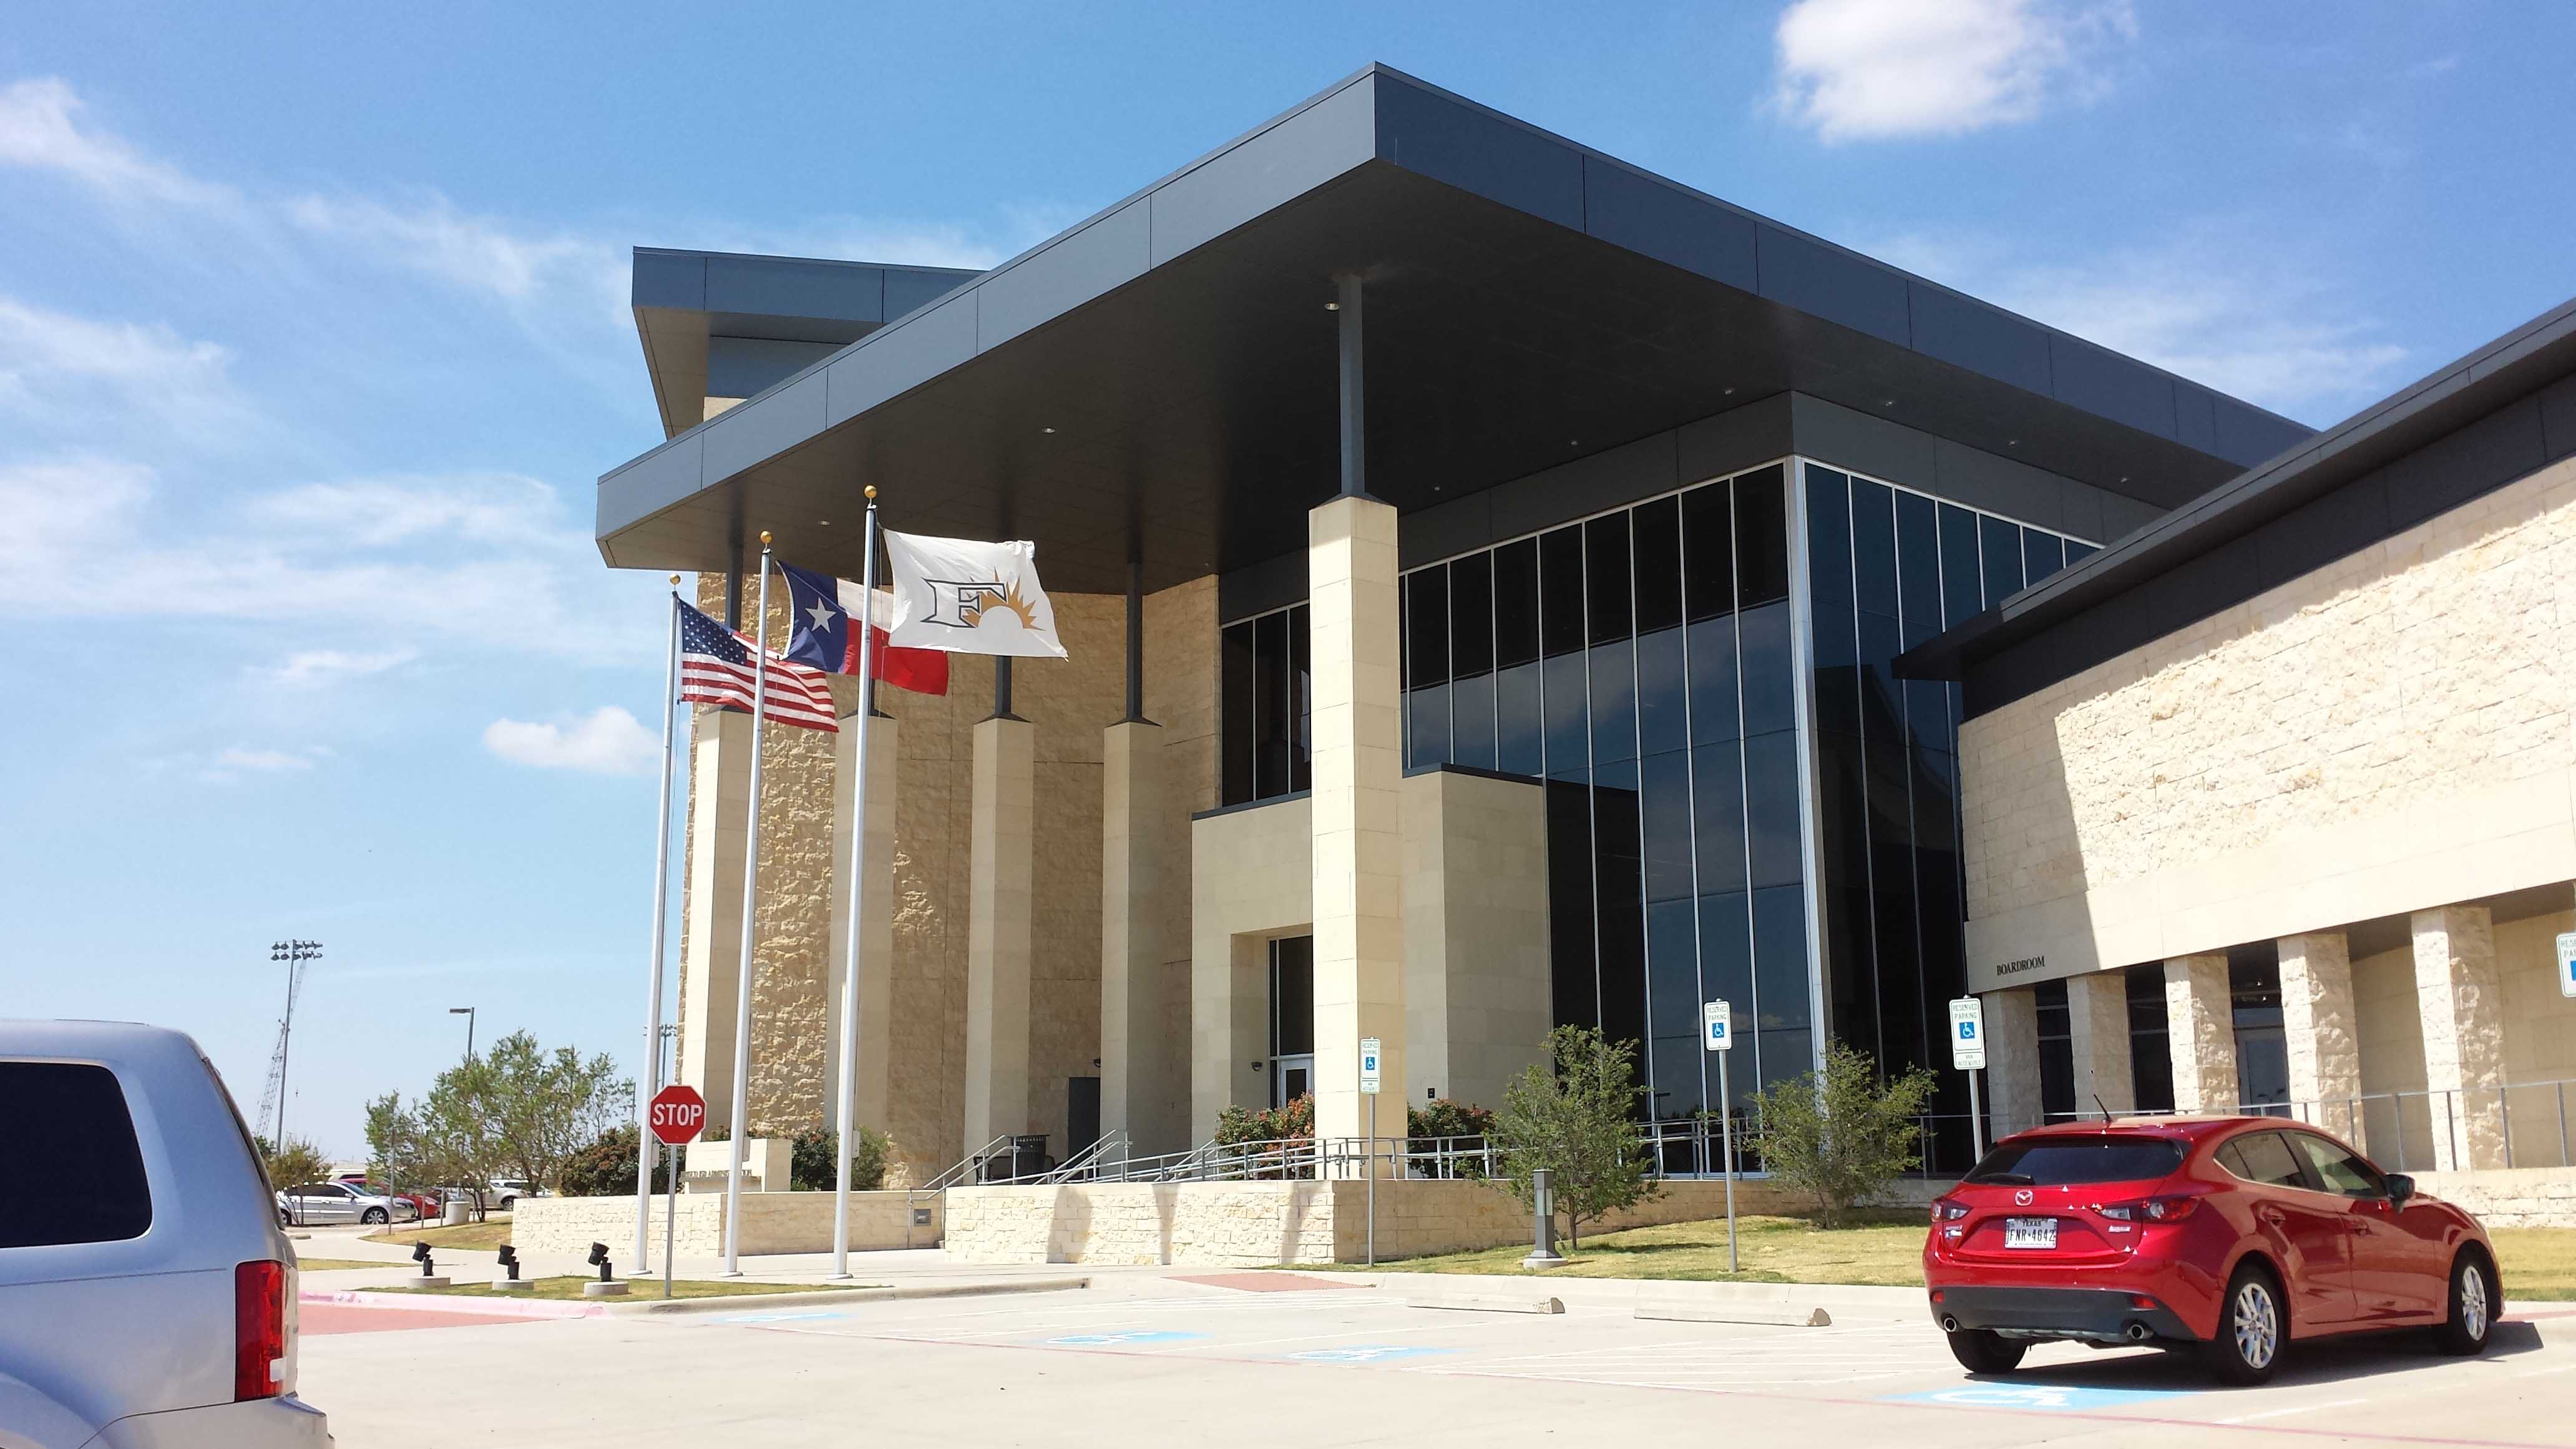 The Frisco ISD Administration building on Ohio Drive is the headquarters for one of the fastest growing school districts in the country. With Superintendent Dr. Jeremy Lyon leading the way, FISD opened four new schools this year, with as many as eight more scheduled to open in the next two years.